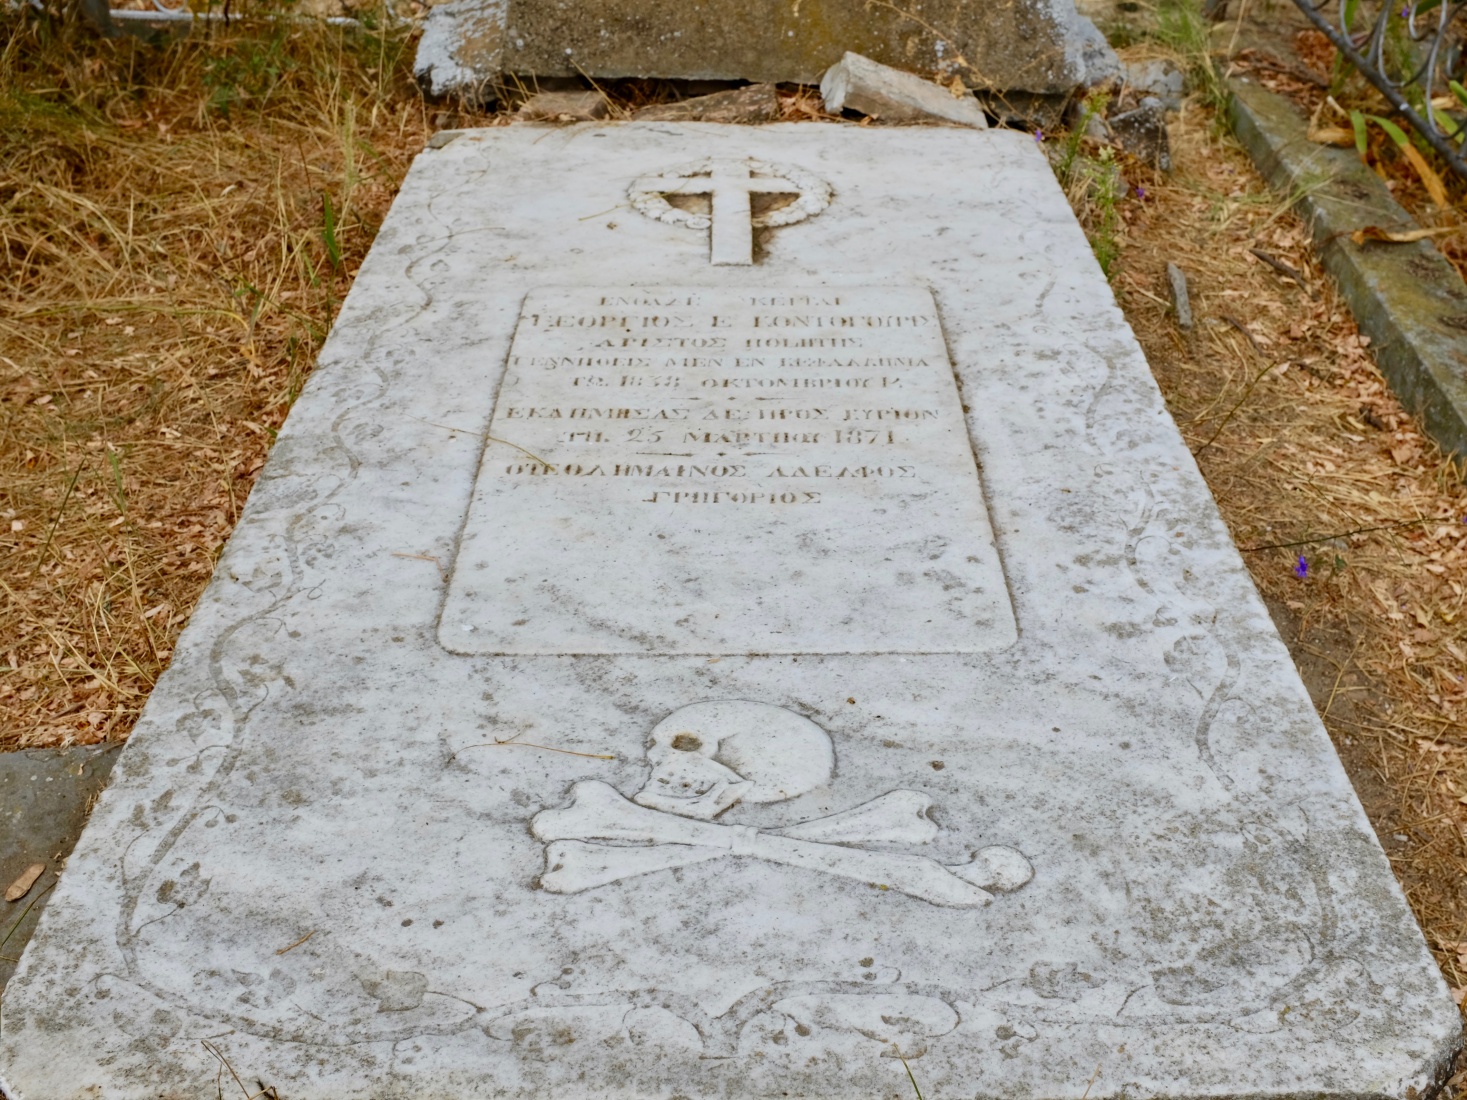 The gravestone of a pirate, said to be the only known pirate grave in existence anywhere, in Sulina, Romania.